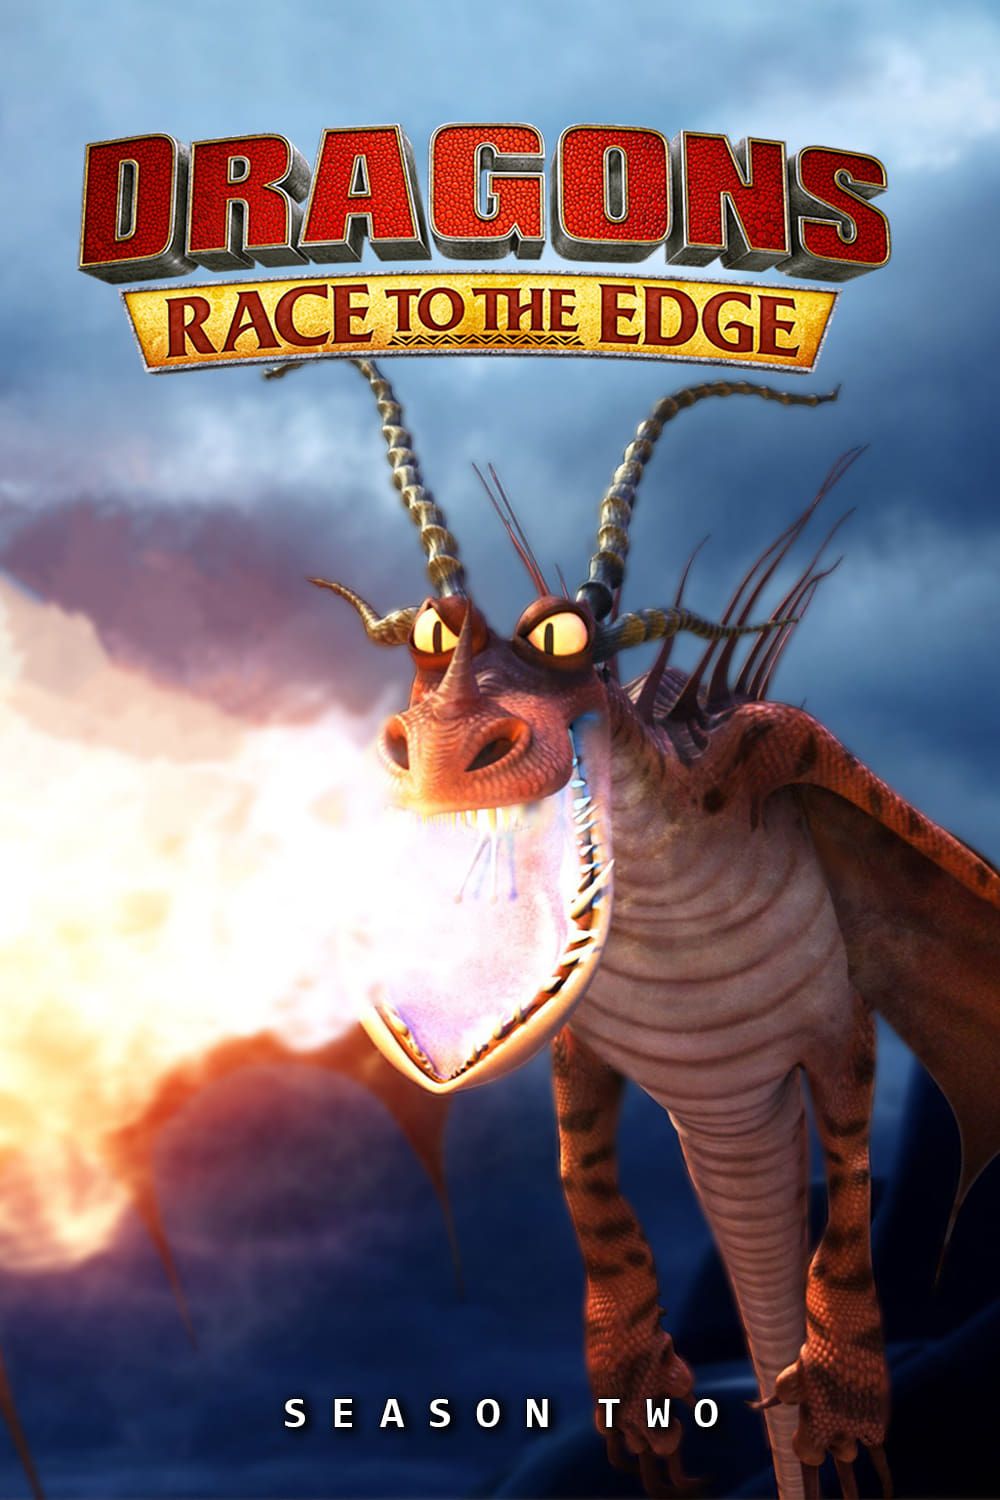 Race to the Edge season 2 : Serenity Dragonrider : Free Download, Borrow,  and Streaming : Internet Archive